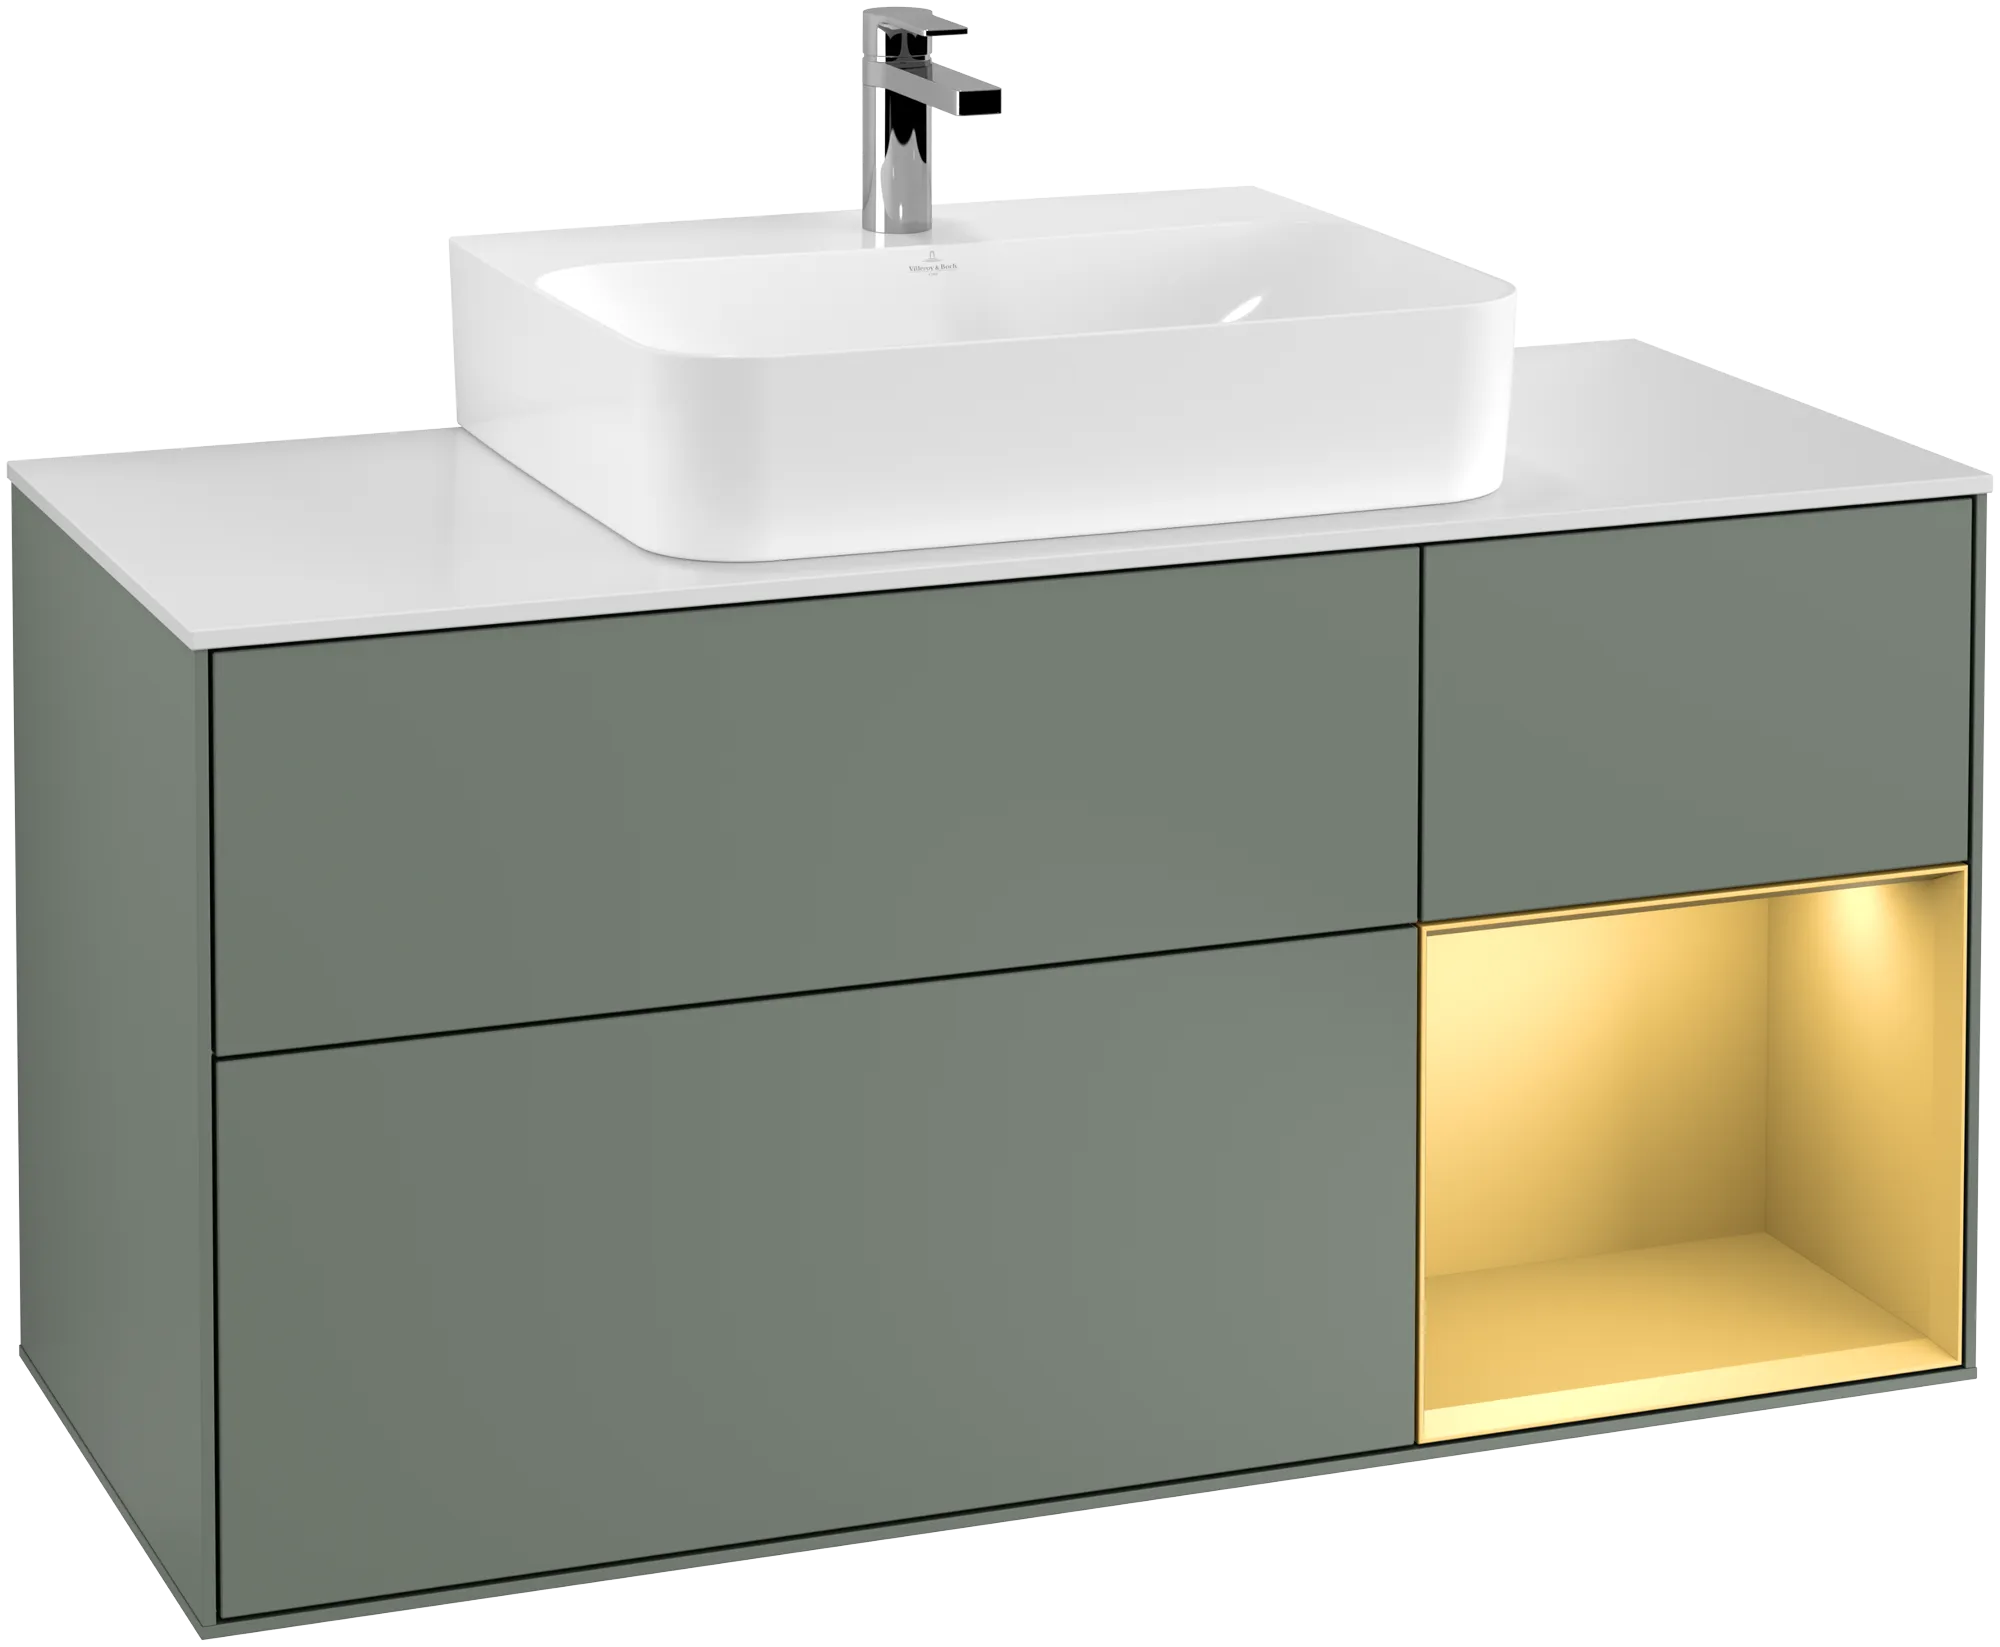 Obrázek VILLEROY BOCH Finion Vanity unit, with lighting, 3 pull-out compartments, 1200 x 603 x 501 mm, Olive Matt Lacquer / Gold Matt Lacquer / Glass White Matt #G171HFGM